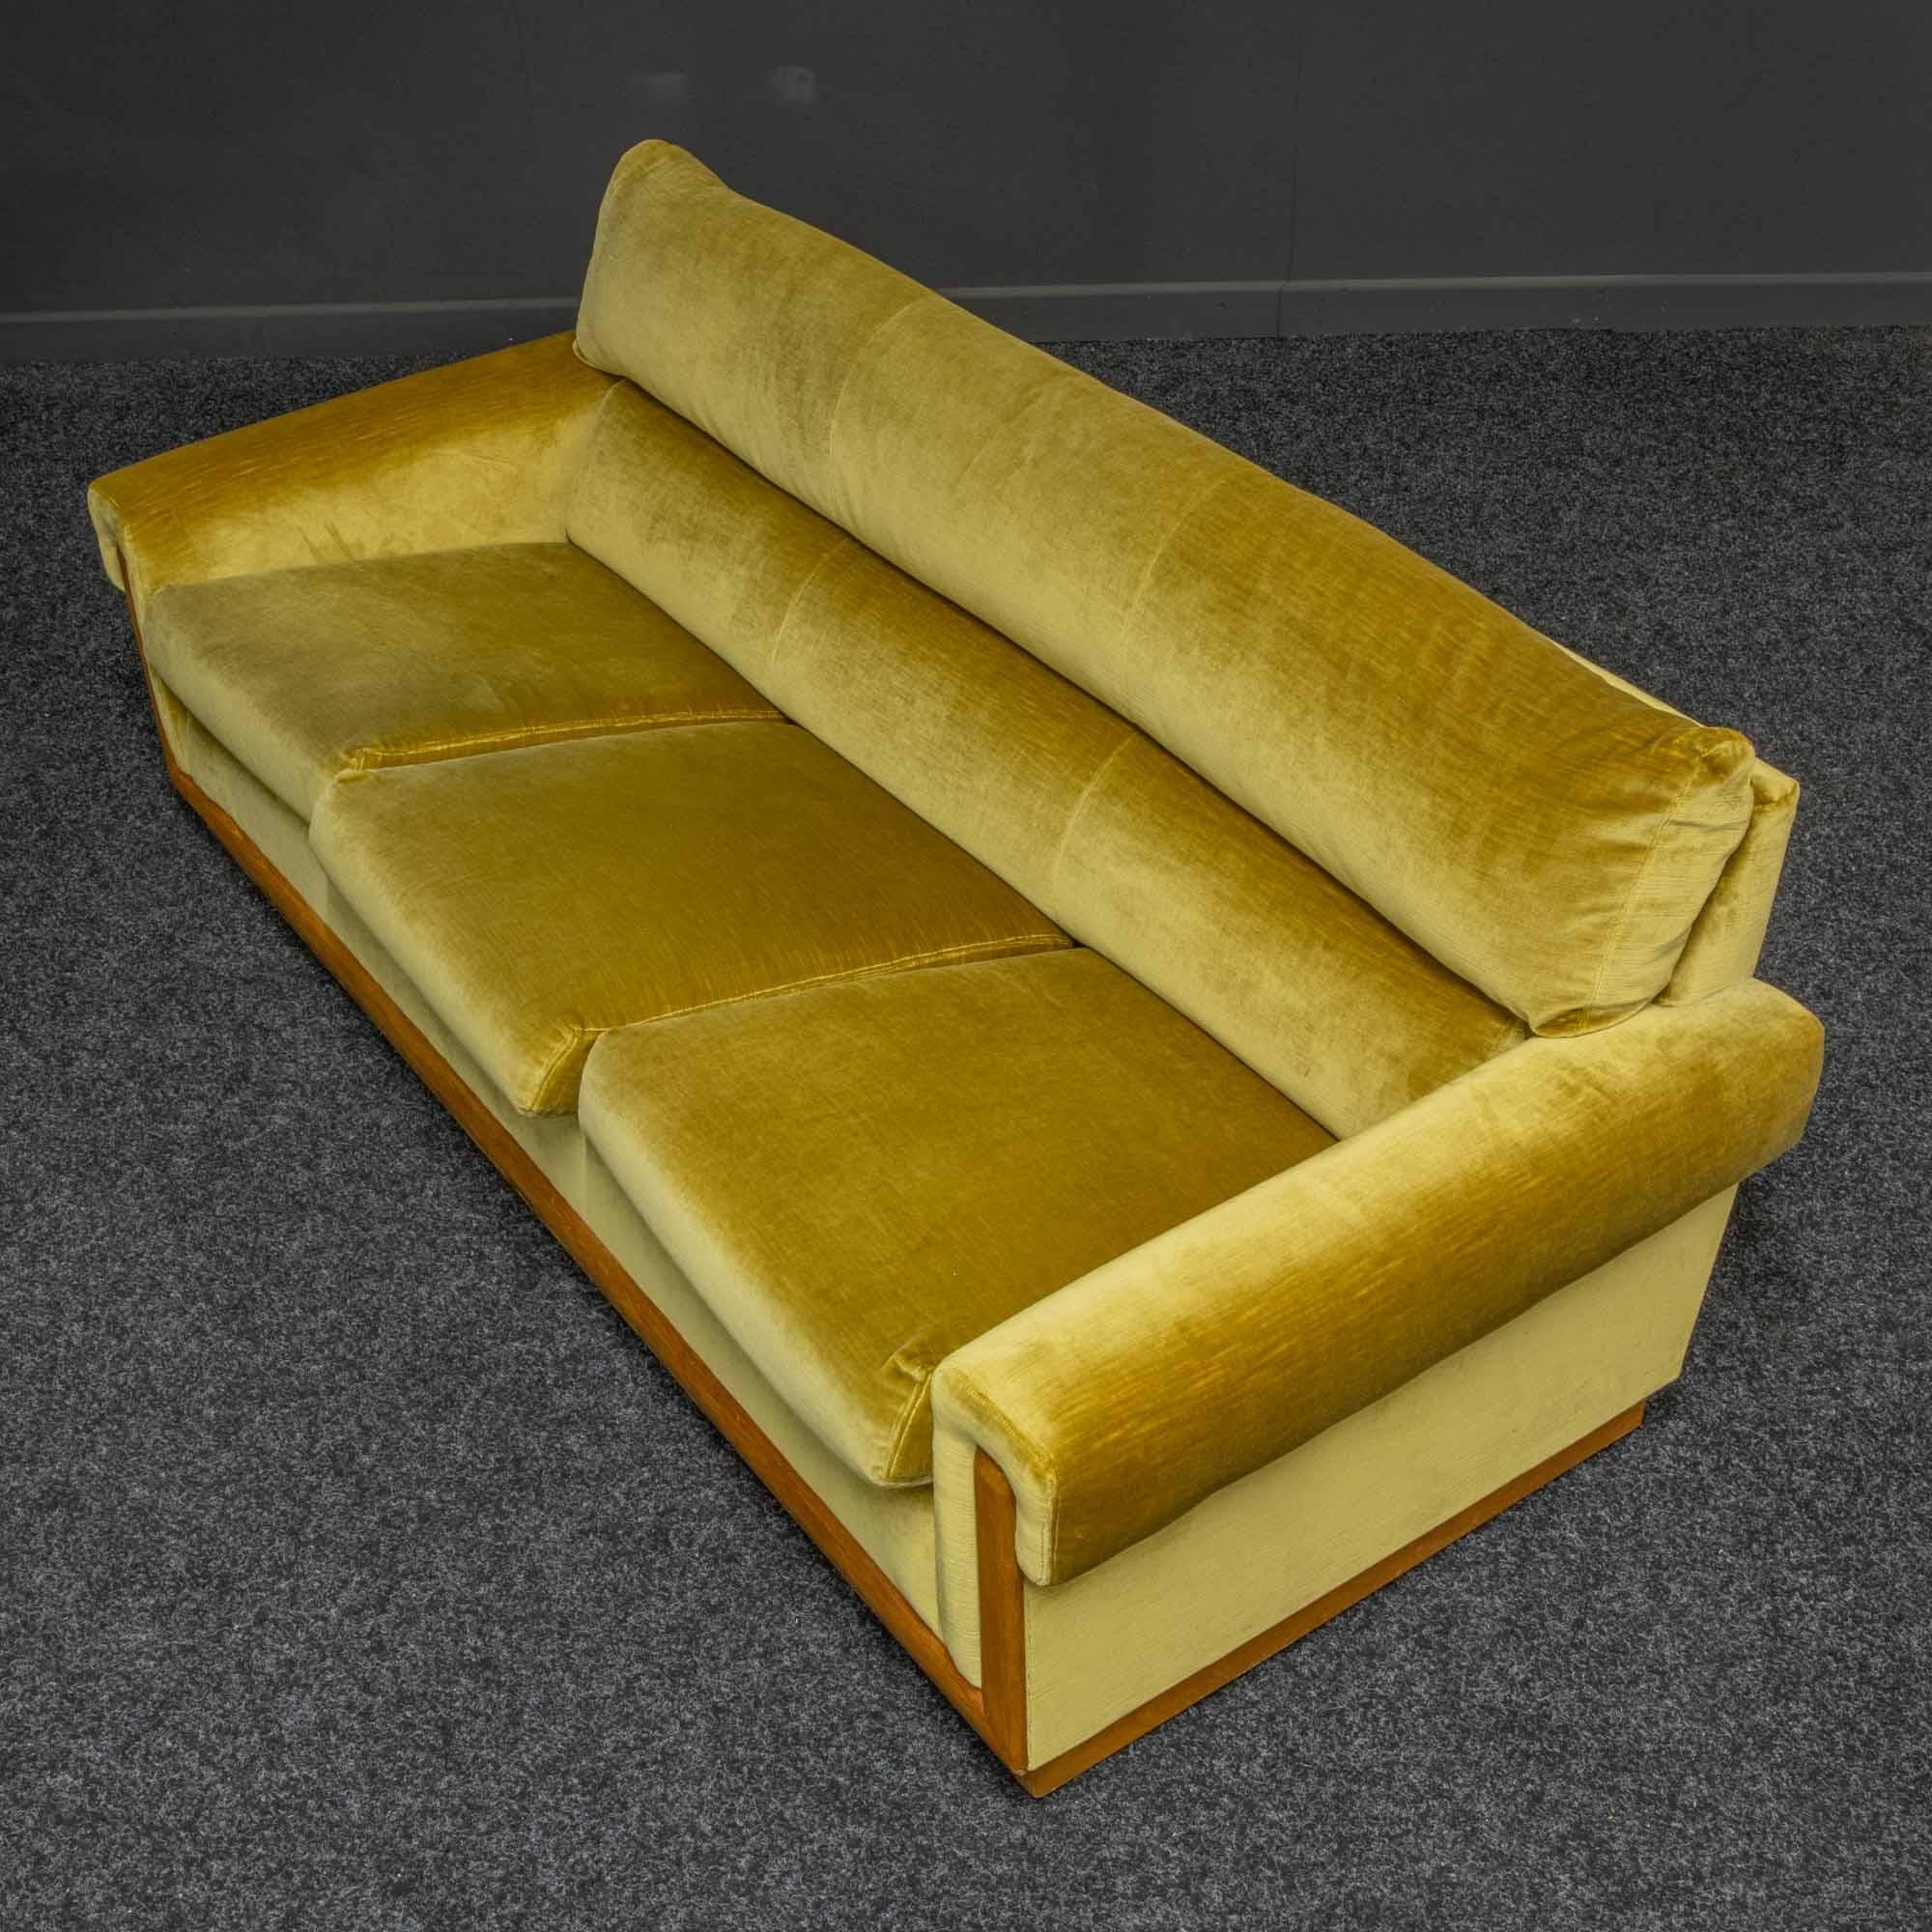 A fantastic mid-20th century four piece suite of Scandinavian manufacture. The main exposed frame is teak and the covering is the original gold Draylon (velvet). The four-seat settee is unusually large at 247cm = 97 inches long. The three-seat